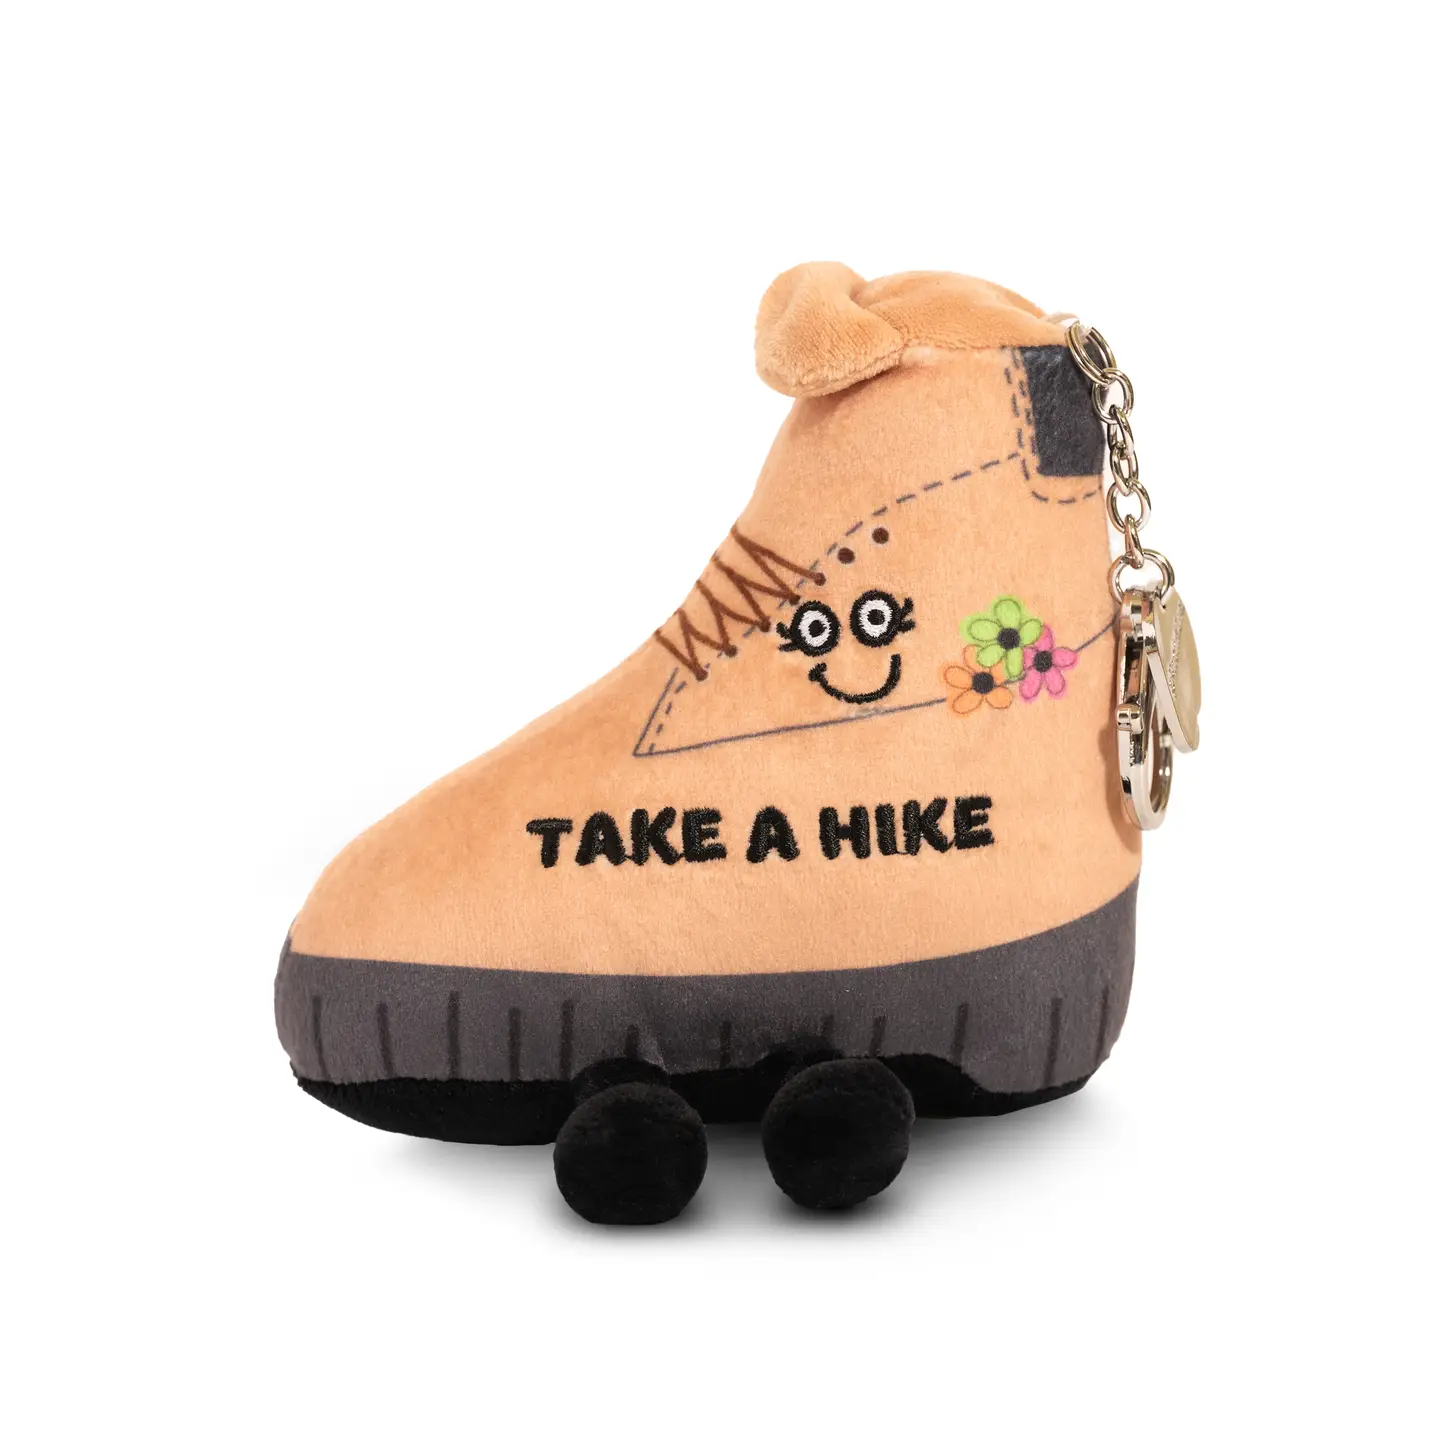 Talk to the hand? More like, take a hike! This bag charm is not afraid to give you the boot! Her sassy smile and expressive eye are just *chef’s kiss.* She’d be a fun addition to any purse, wallet, or backpack.